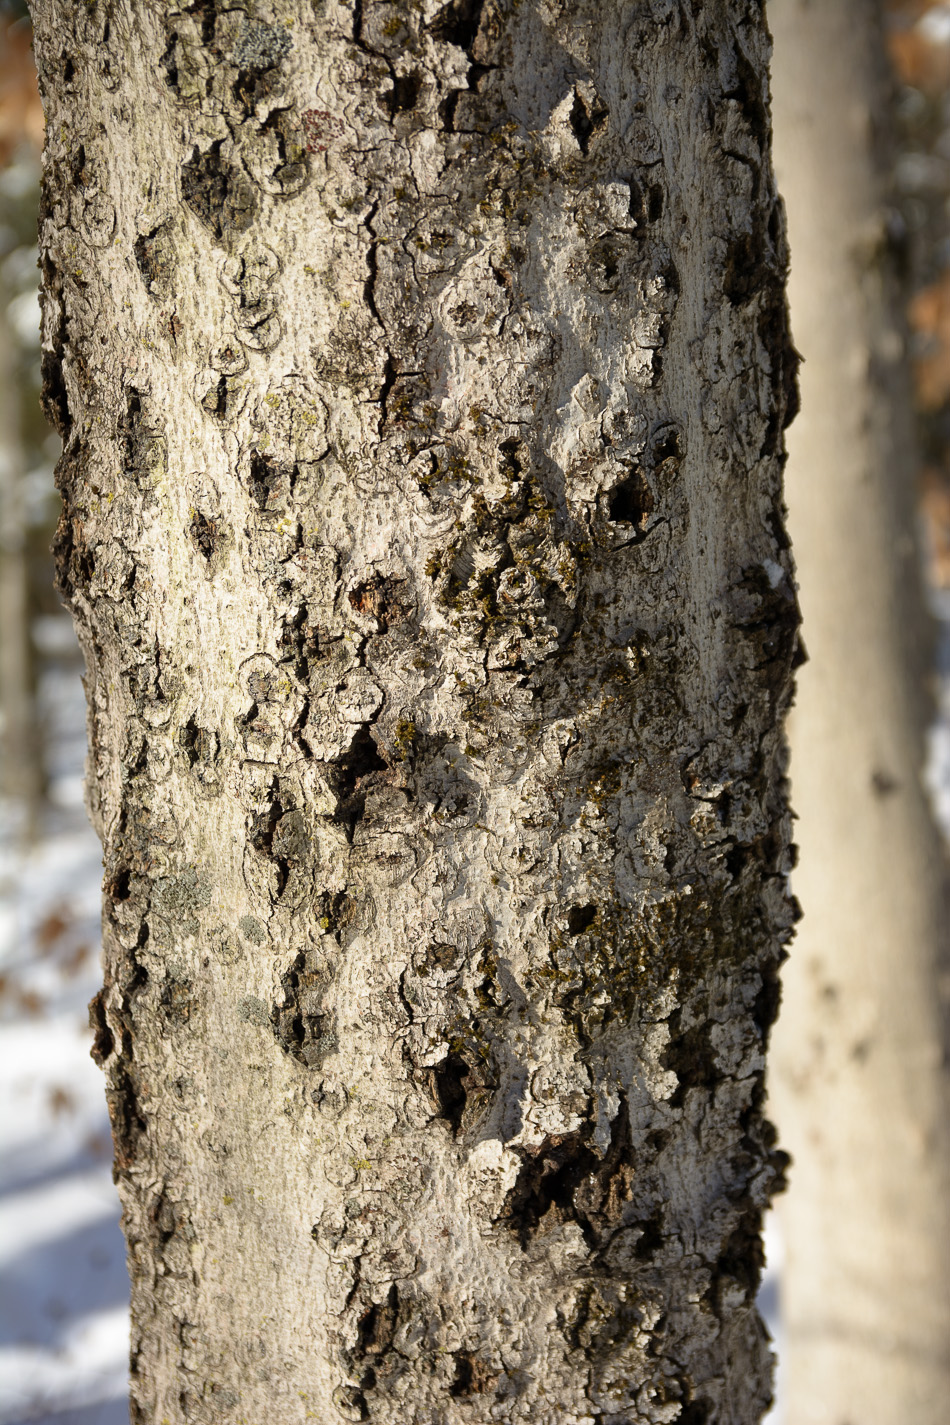 Photo revealing the close up textures of tree bark